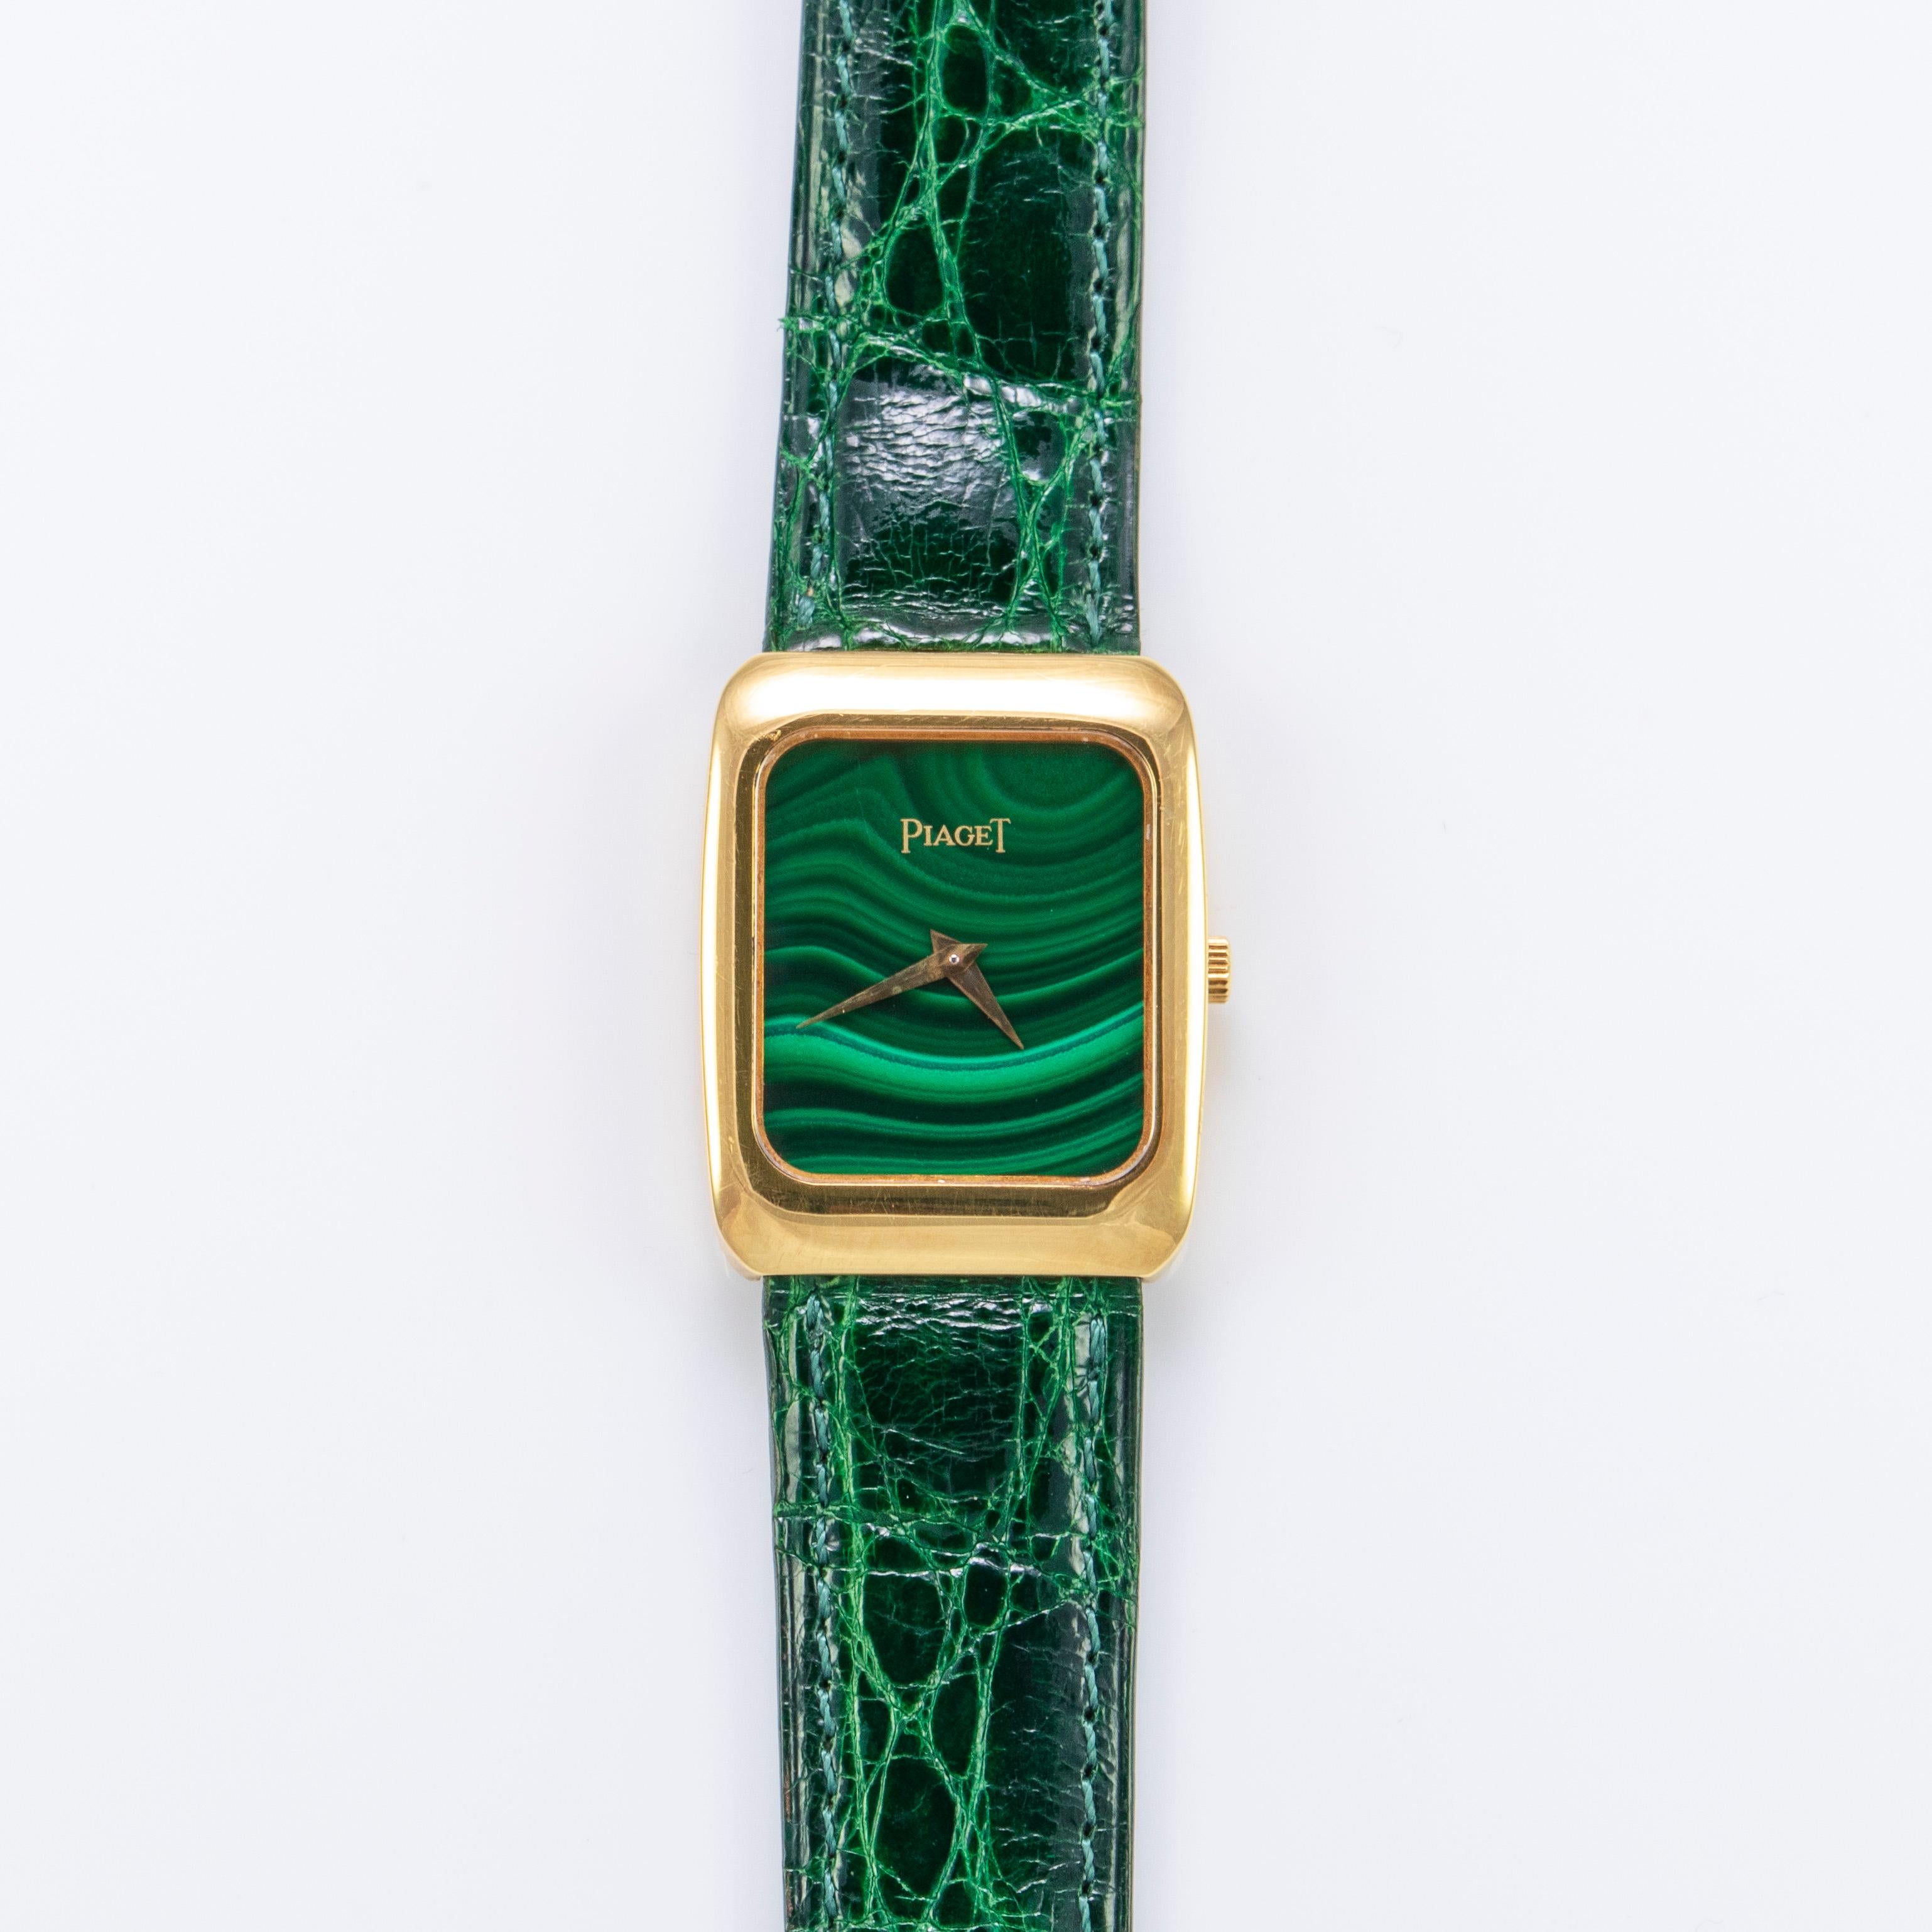 Piaget 18K Yellow Gold Watch with Malachite Stone Dial
Complicated Quartz Movement
Original Rhodonite Dial
Late 1970's Early 1980's Production
Solid 18K Yellow Gold Unpolished Tank Case Showing a Nice Patina Throughout
Case Shows some Light Wear and